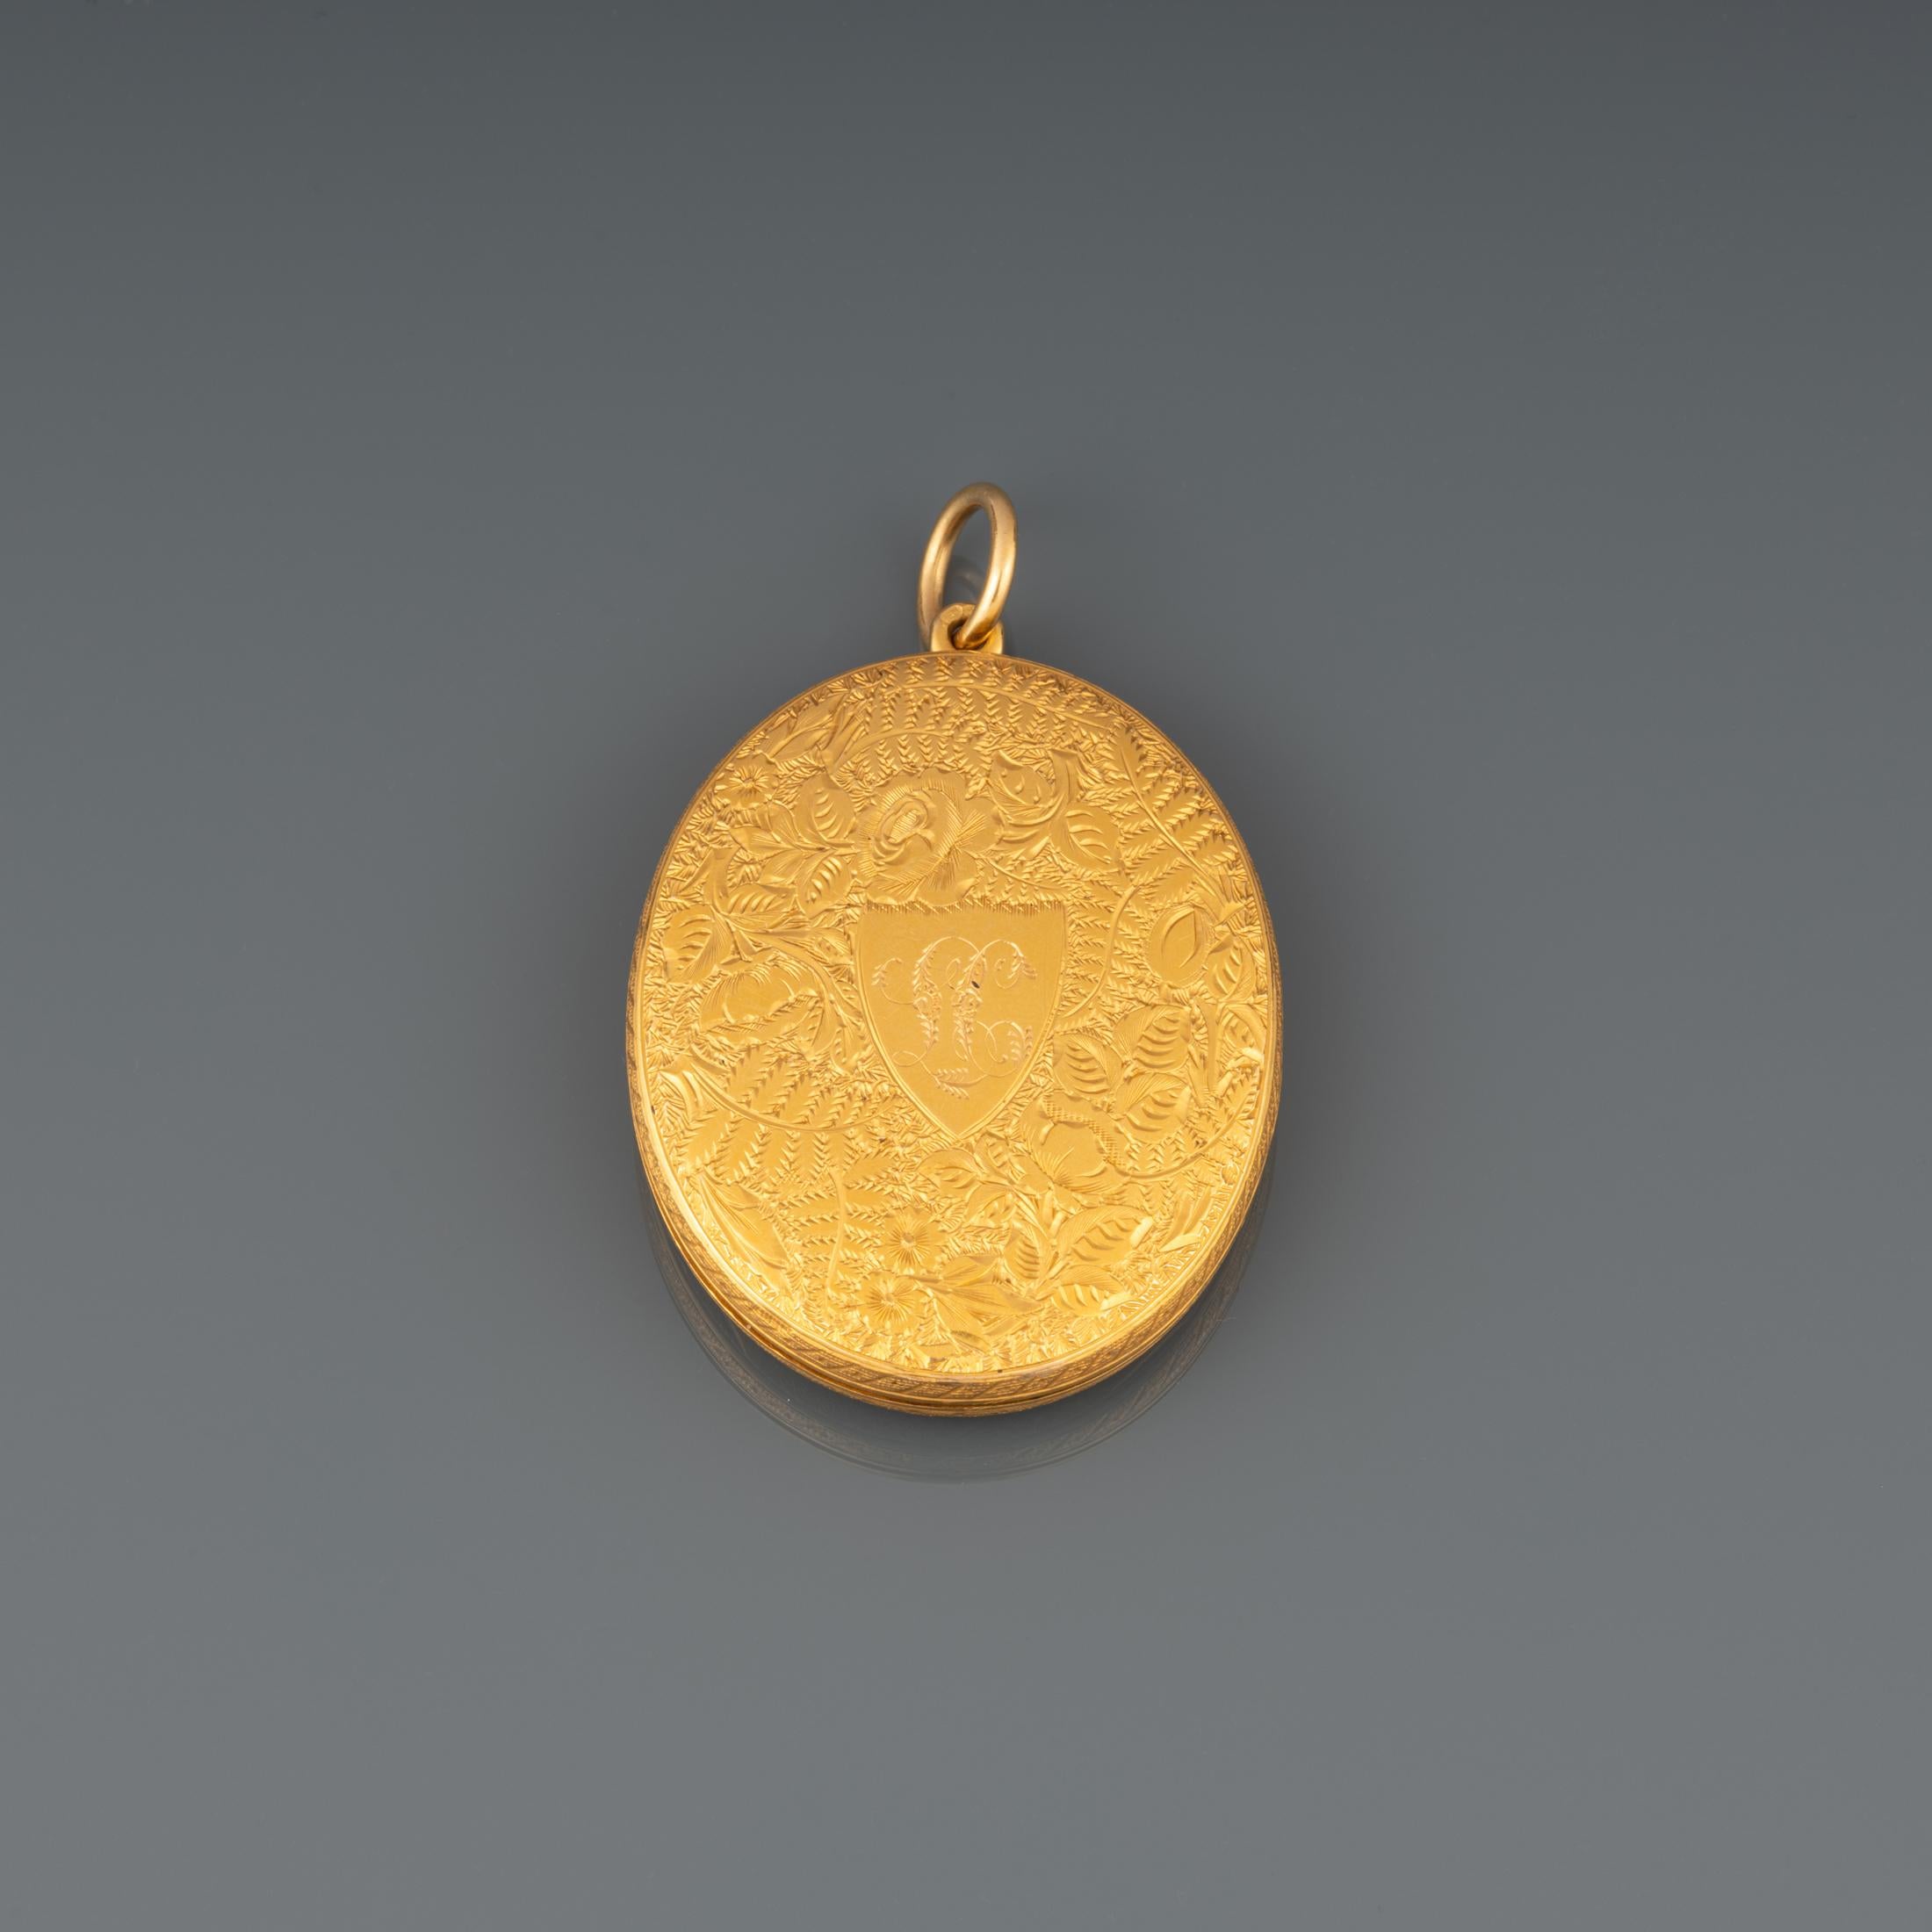 A very beautiful antique locket, made in France circa 1860.

Made in yellow gold 18K. It is big, the diameter is 45 and 36mm. 

Weight: 22.30 grams